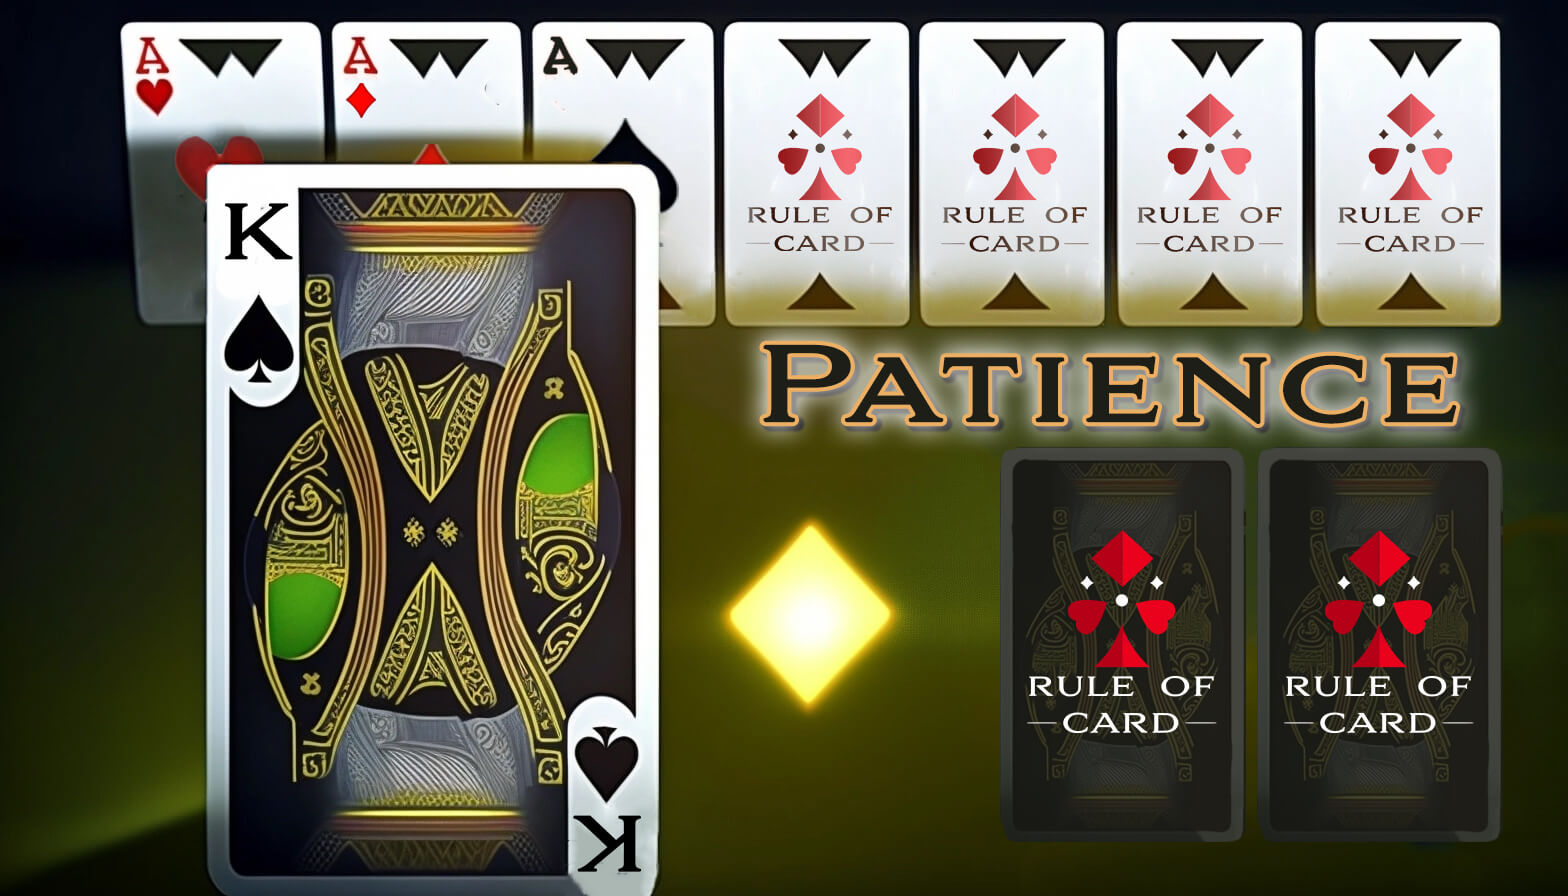 Playing the card game Patience